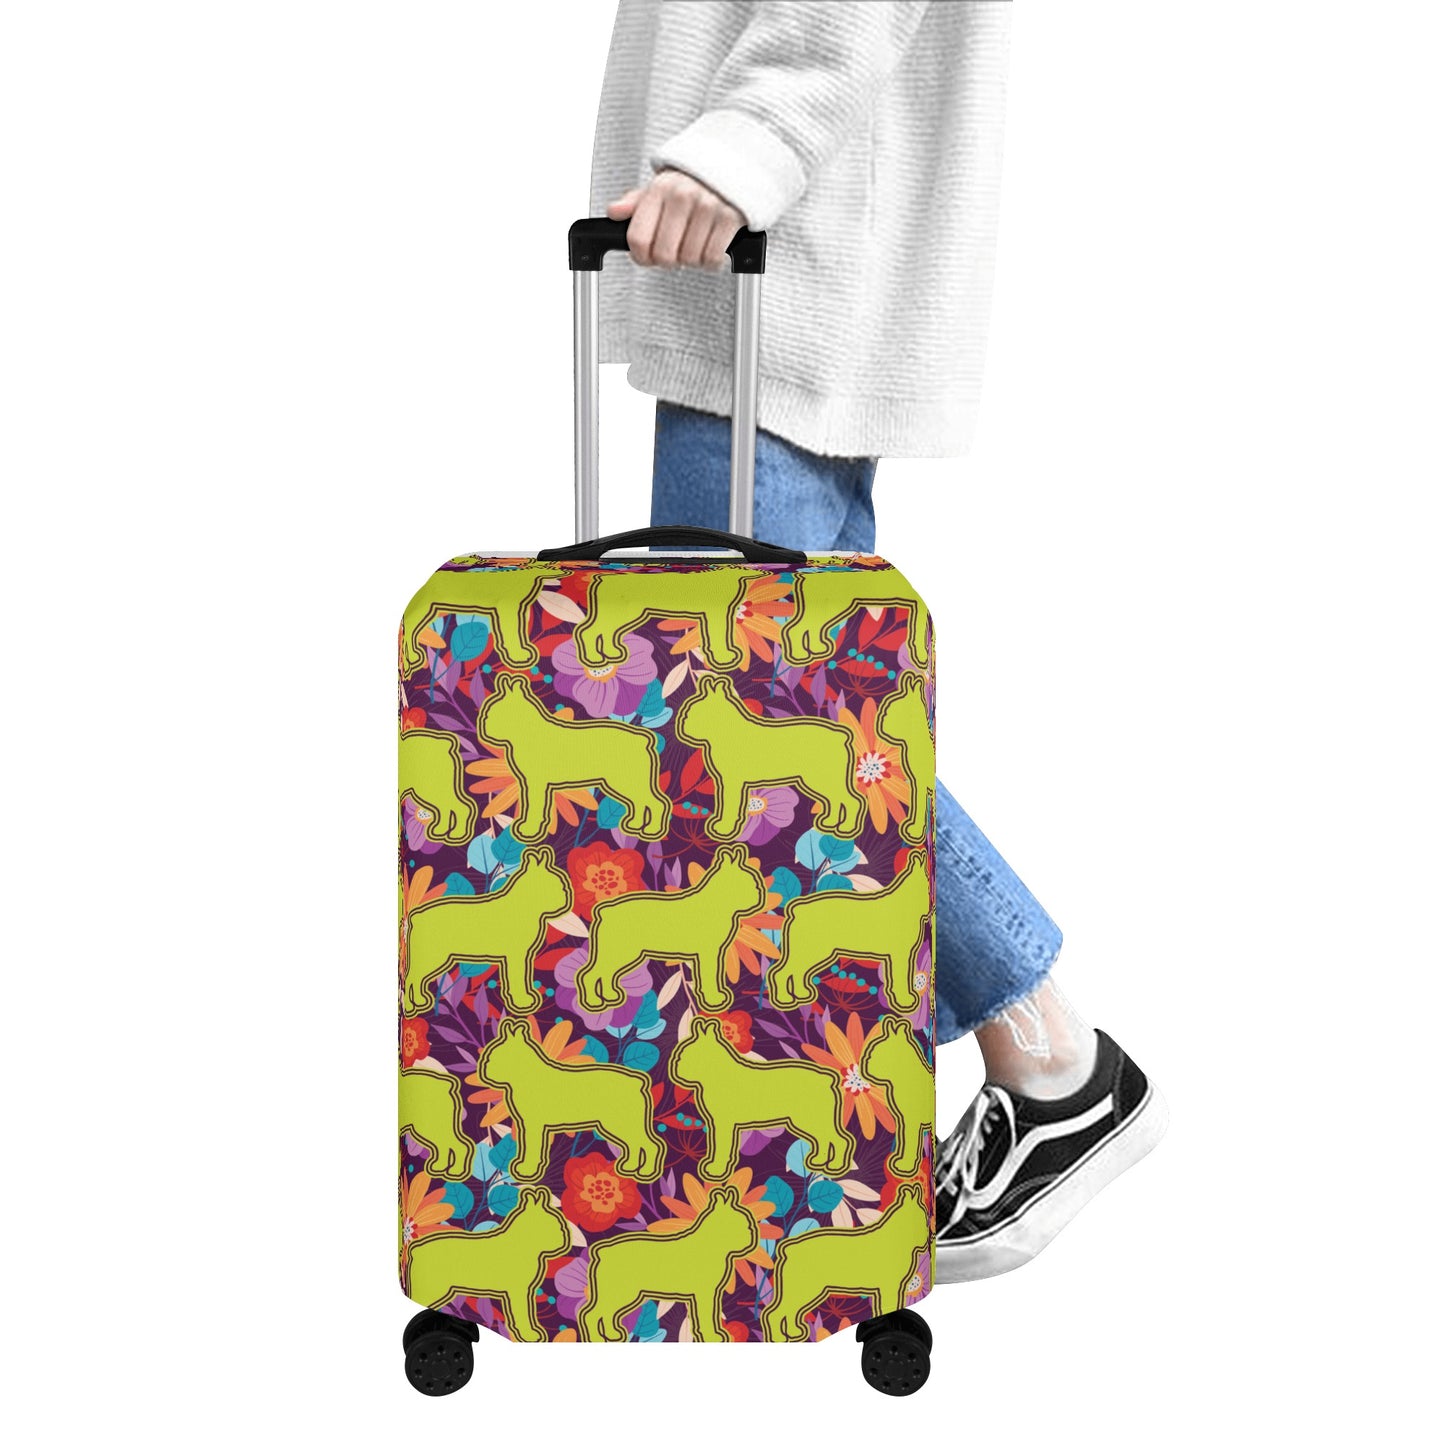 Lexi - Luggage Cover for Boston Terrier lovers